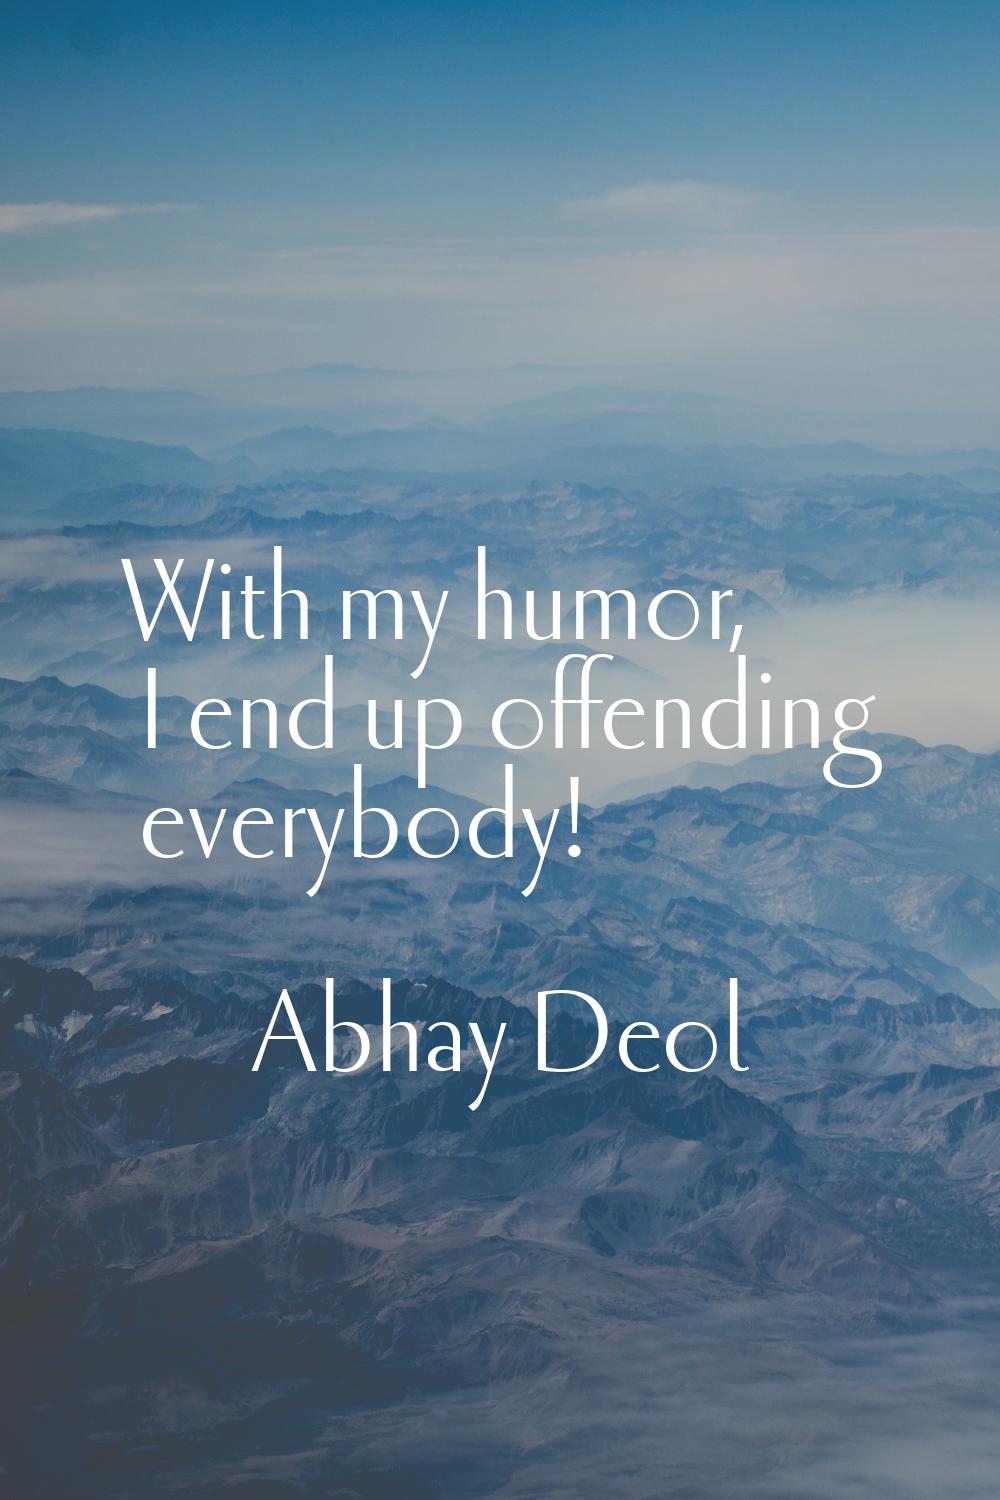 With my humor, I end up offending everybody!